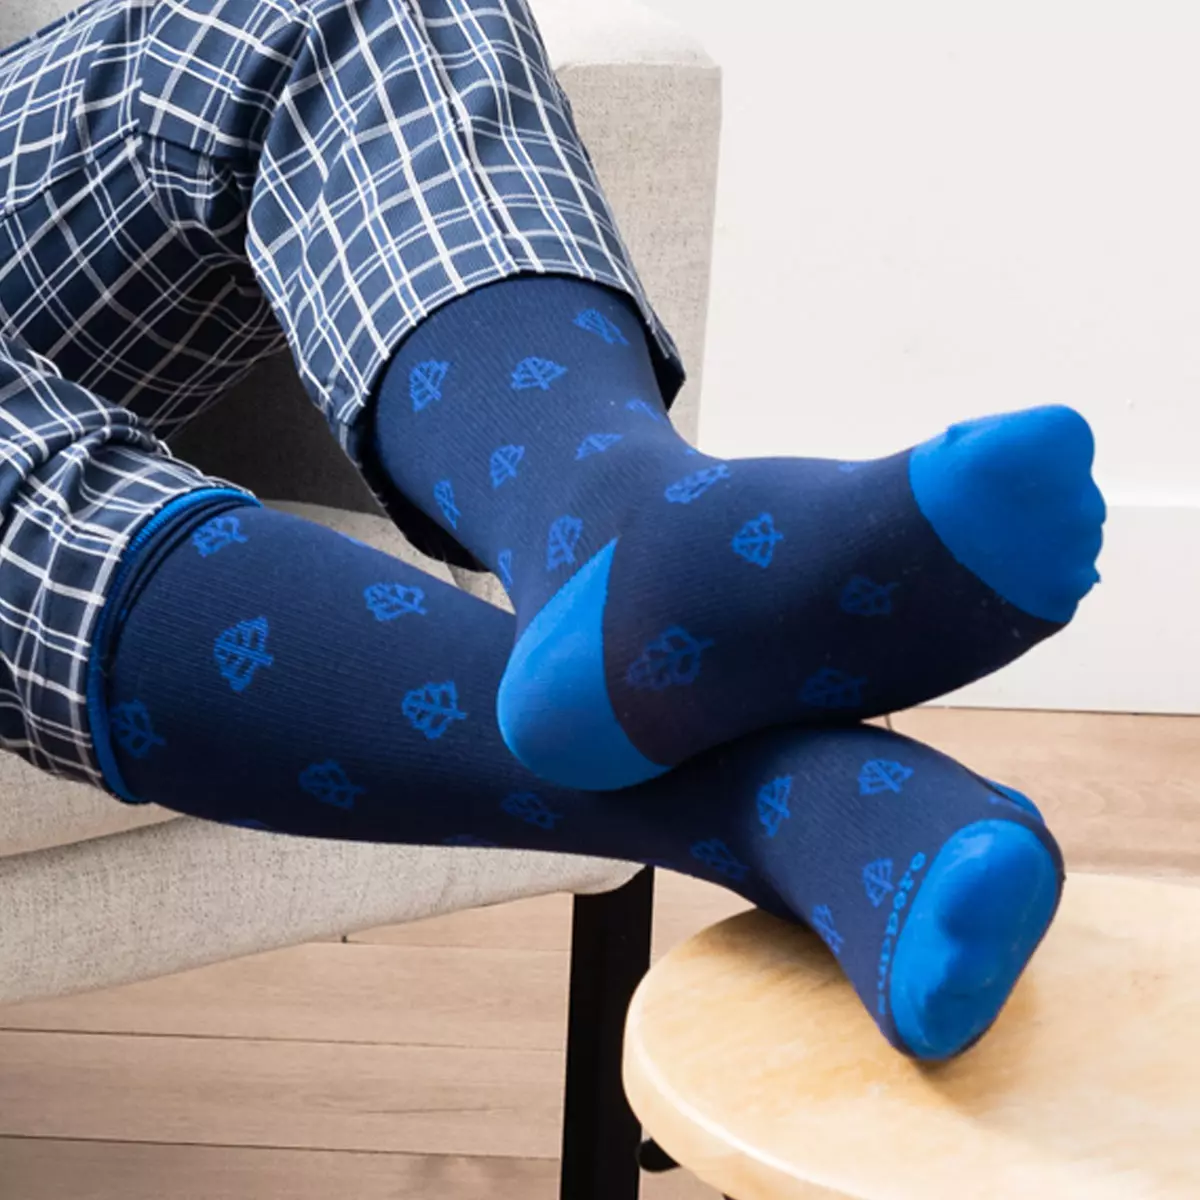 Supporo Unisex Leaves Compression Socks